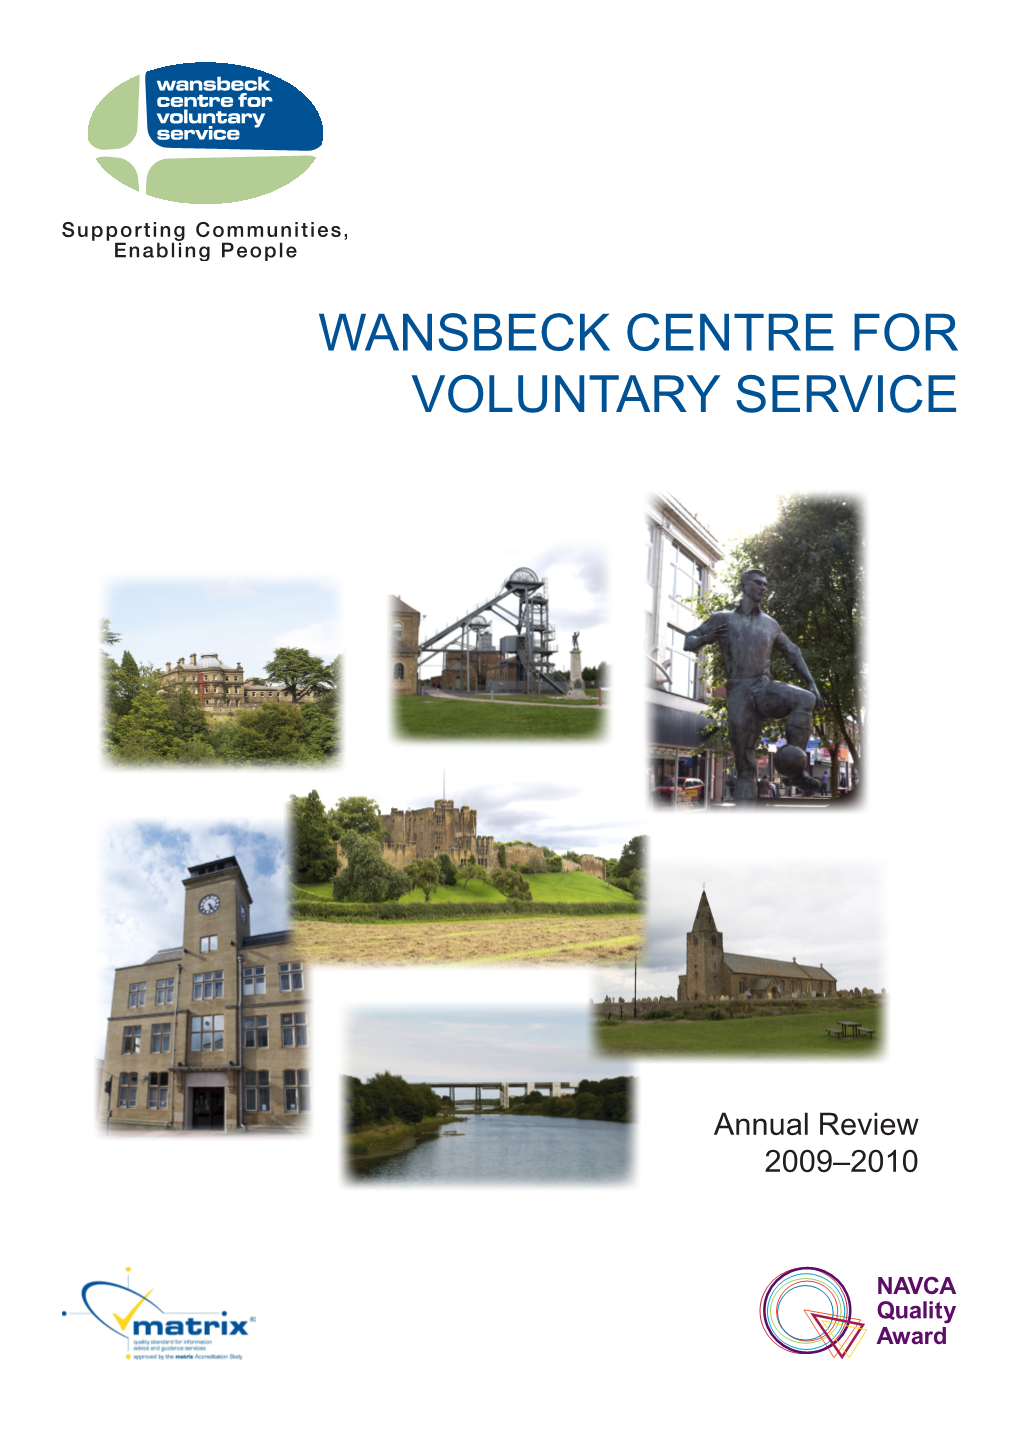 Wansbeck Centre for Voluntary Service